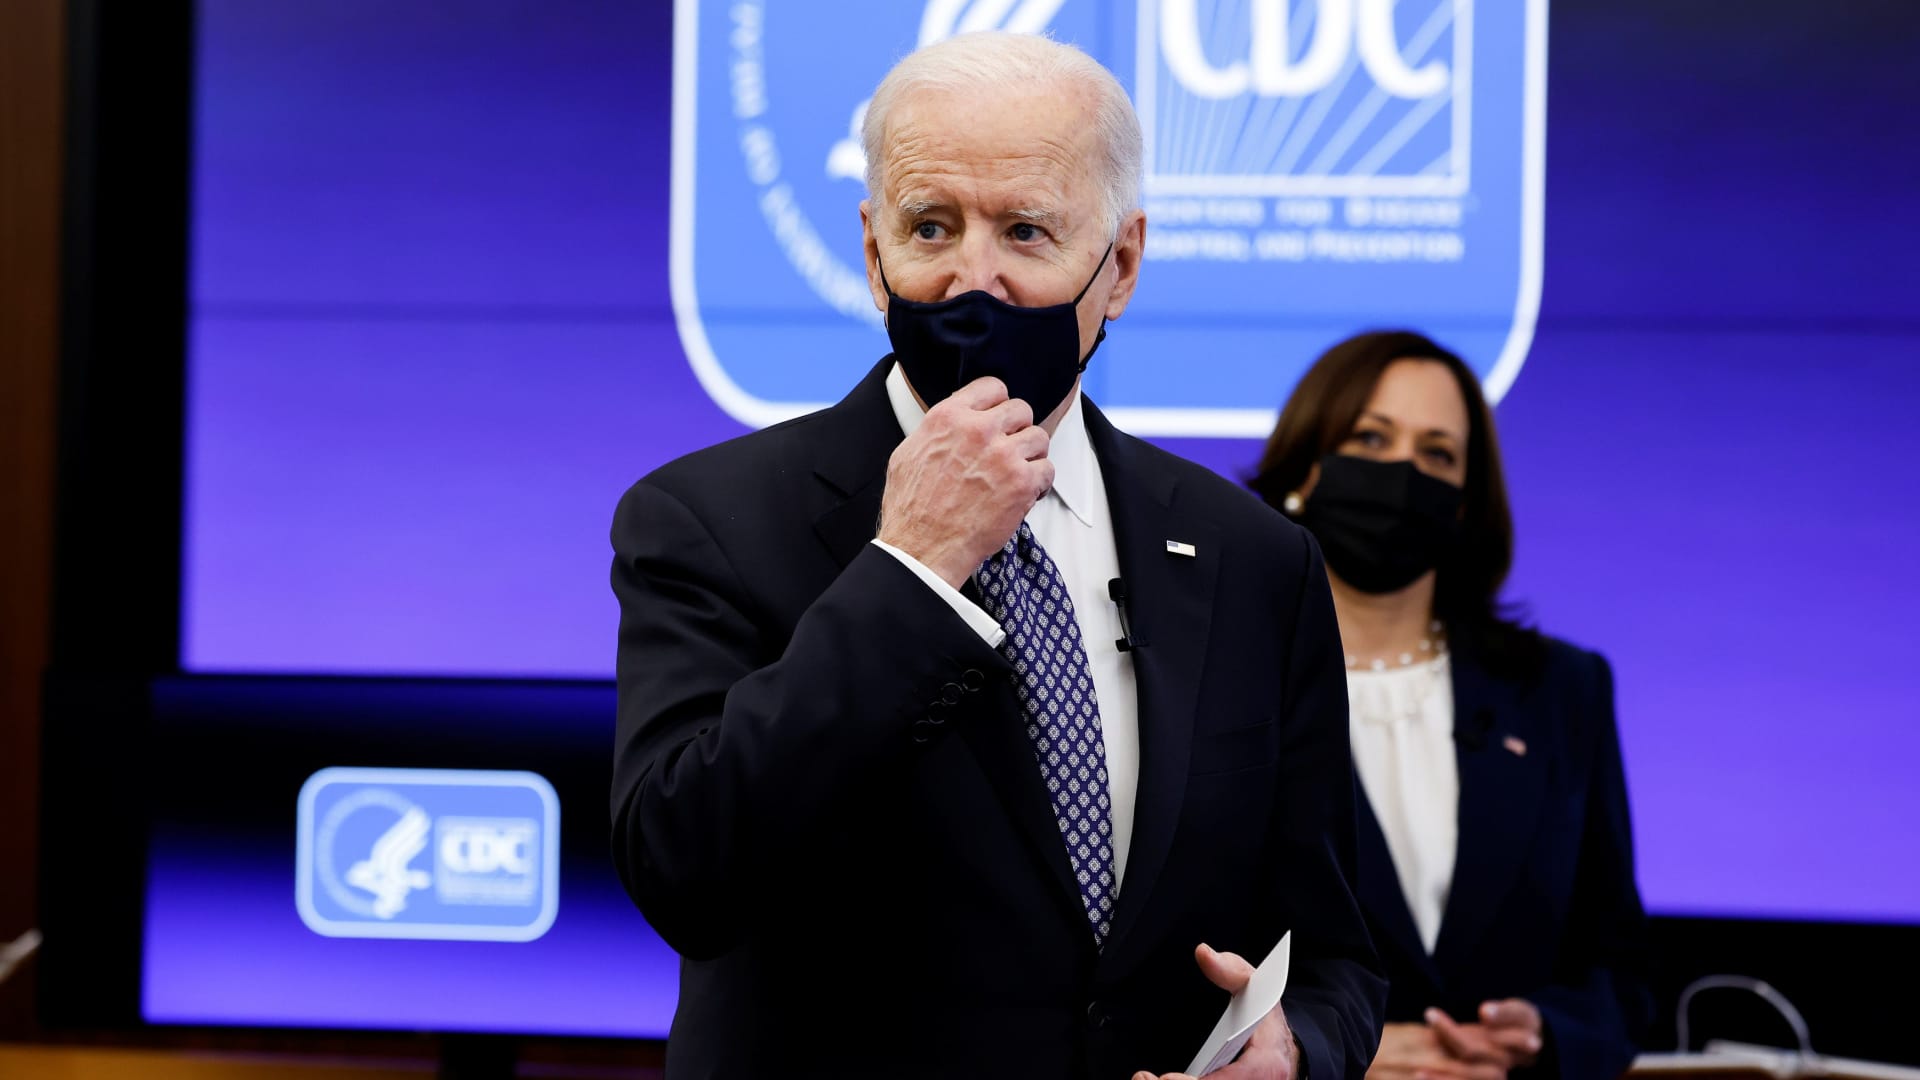 U.S. President Joe Biden and Vice President Kamala Harris receive an update on the fight against the coronavirus disease (COVID-19) pandemic as they visit the Centers for Disease Control and Prevention (CDC) in Atlanta, Georgia, March 19, 2021.